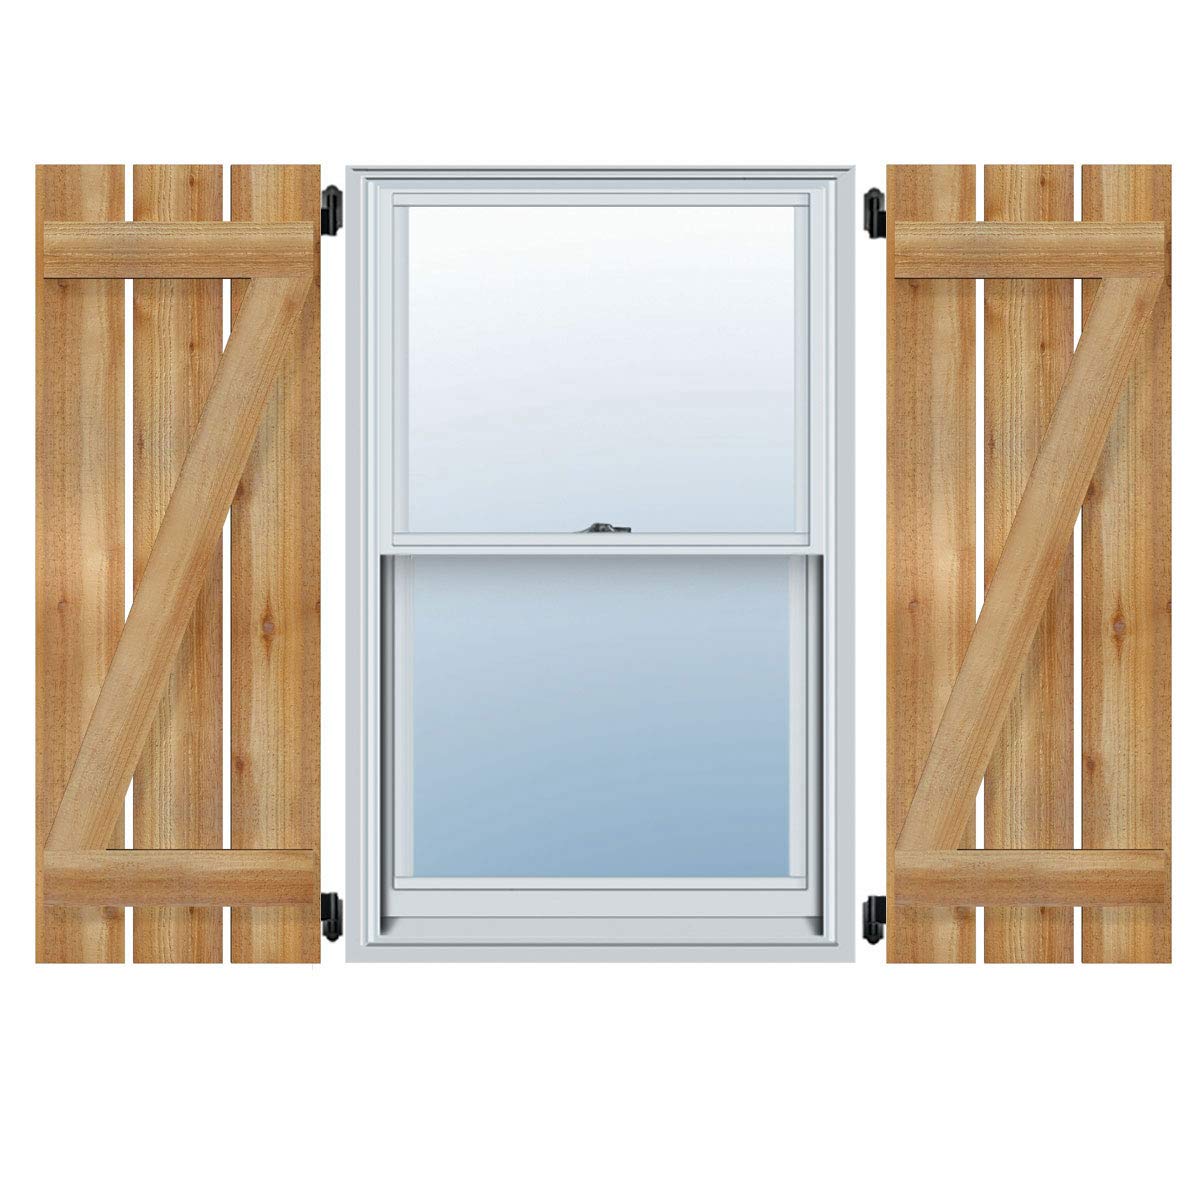 Ekena Millwork 2-Pack 11.25-in W x 47-in H Unfinished Board and Batten Spaced with z-bar Wood Western Red cedar Exterior Shutters